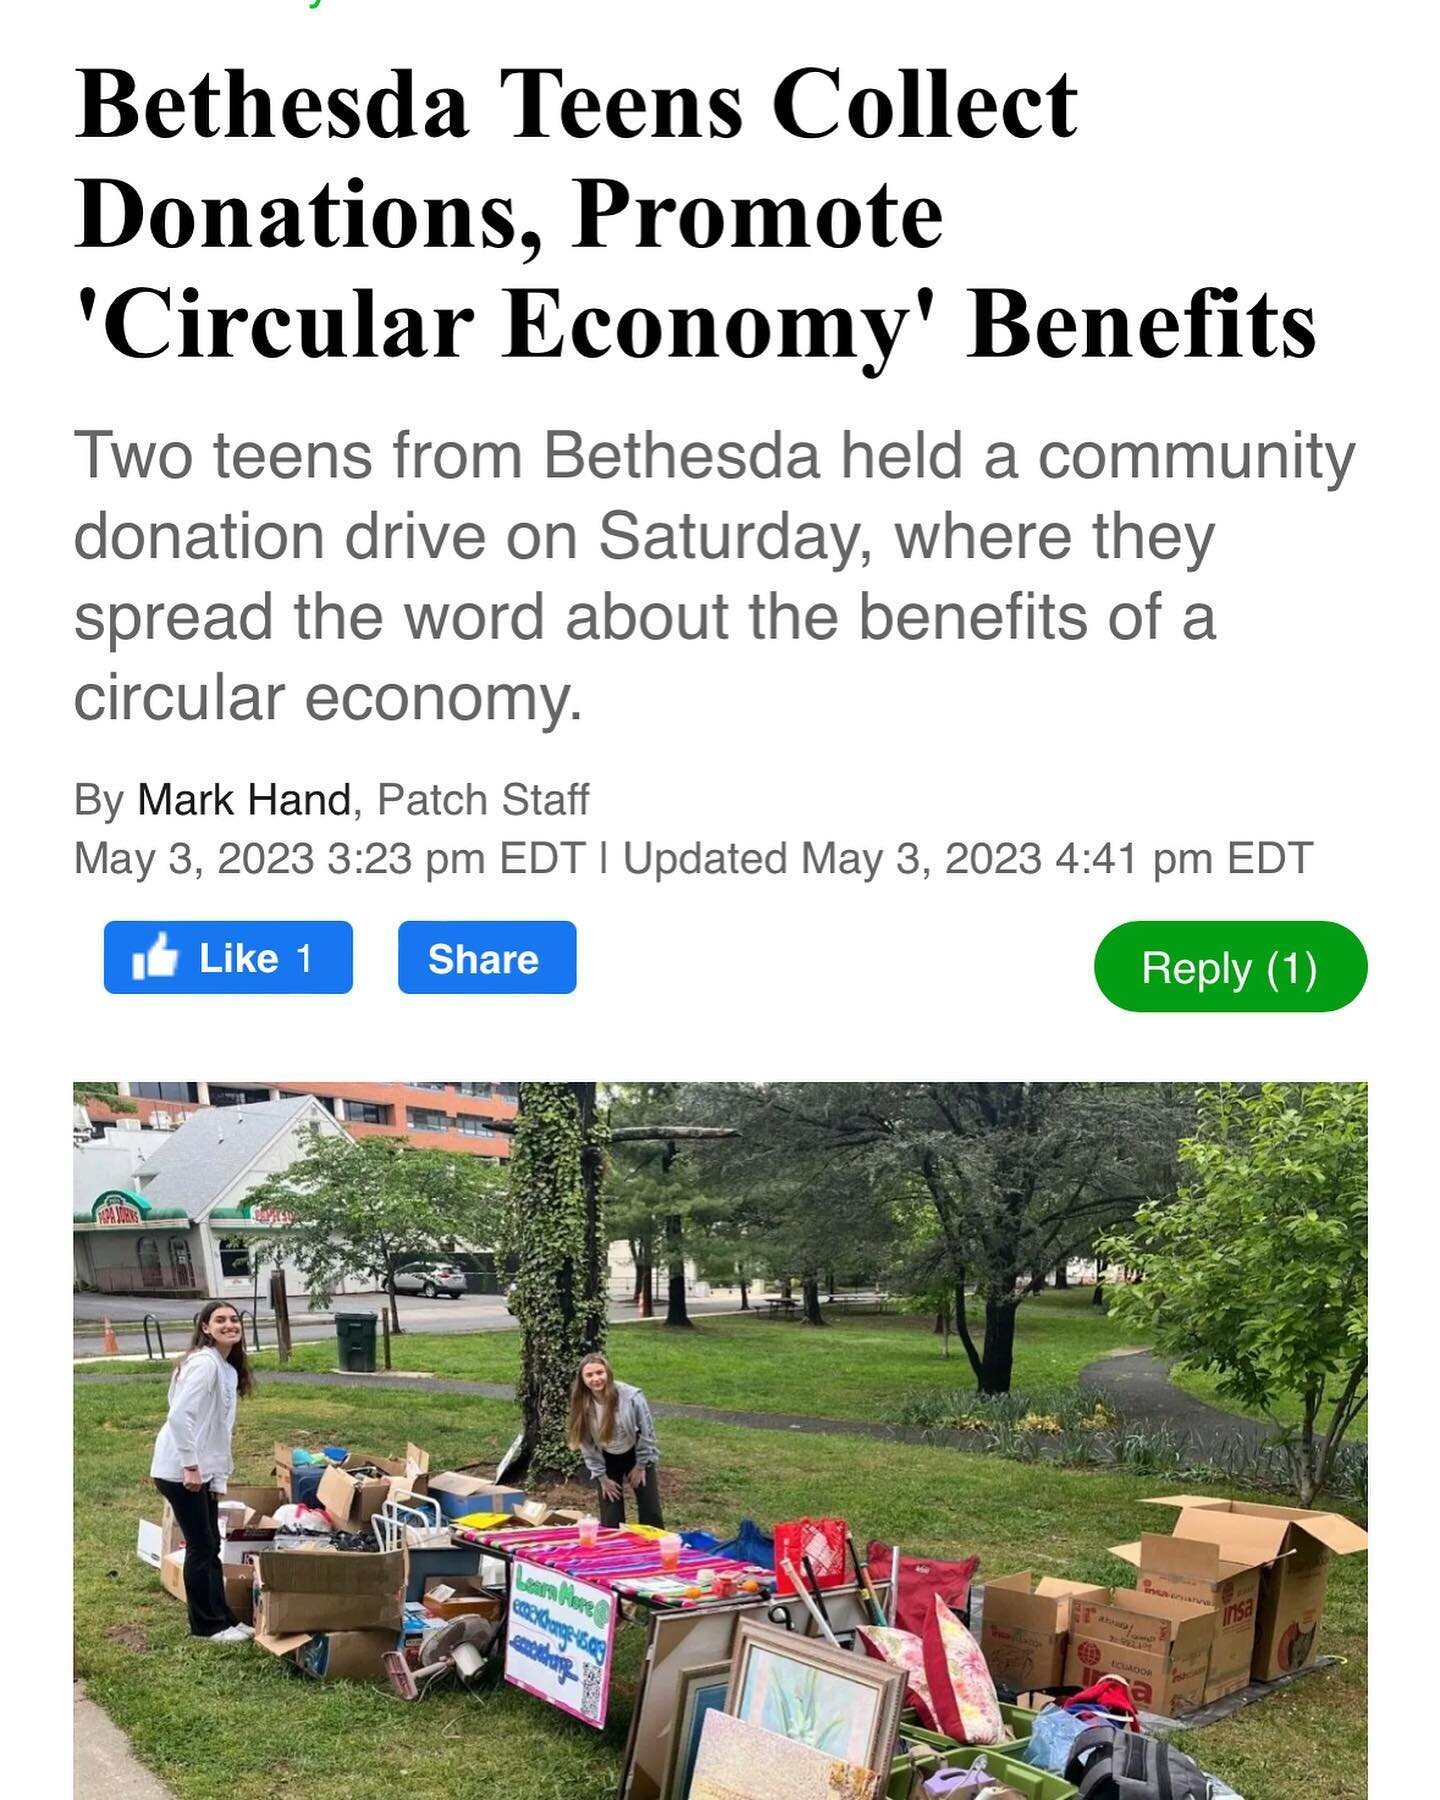 Wow! Thanks to Patch for an amazing follow-up article on EcoExchange! 😁 Read here: https://patch.com/maryland/bethesda-chevychase/amp/31358932/bethesda-teens-collect-donations-promote-circular-economy-benefits